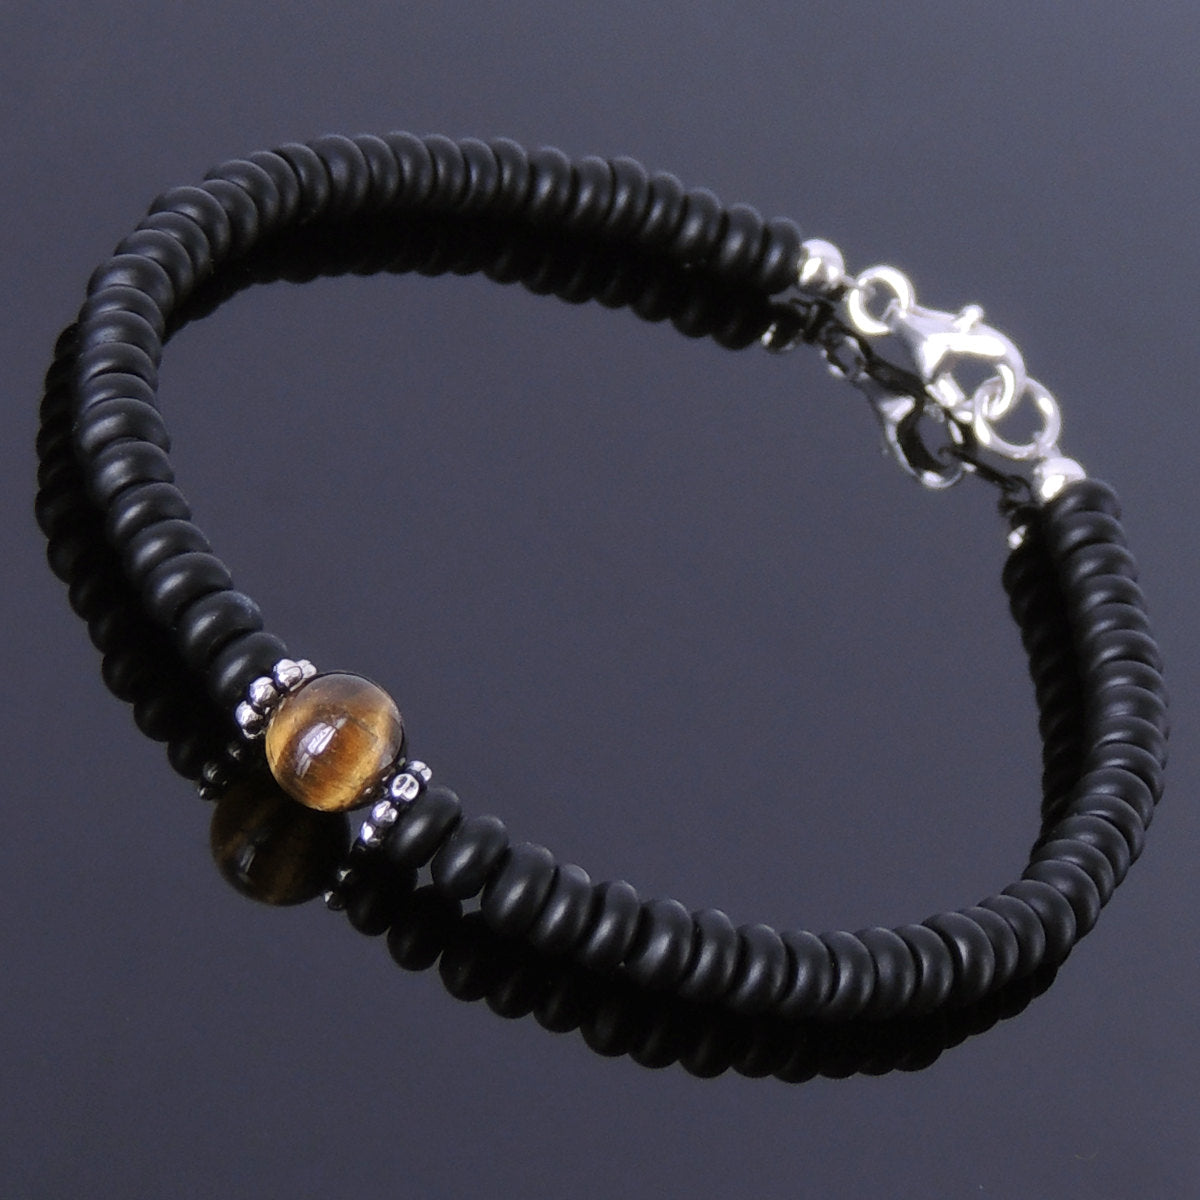 Brown Tiger Eye & Rondelle Matte Black Onyx Healing Gemstone Bracelet with S925 Sterling Silver Spacer Beads & Clasp - Handmade by Gem & Silver BR125